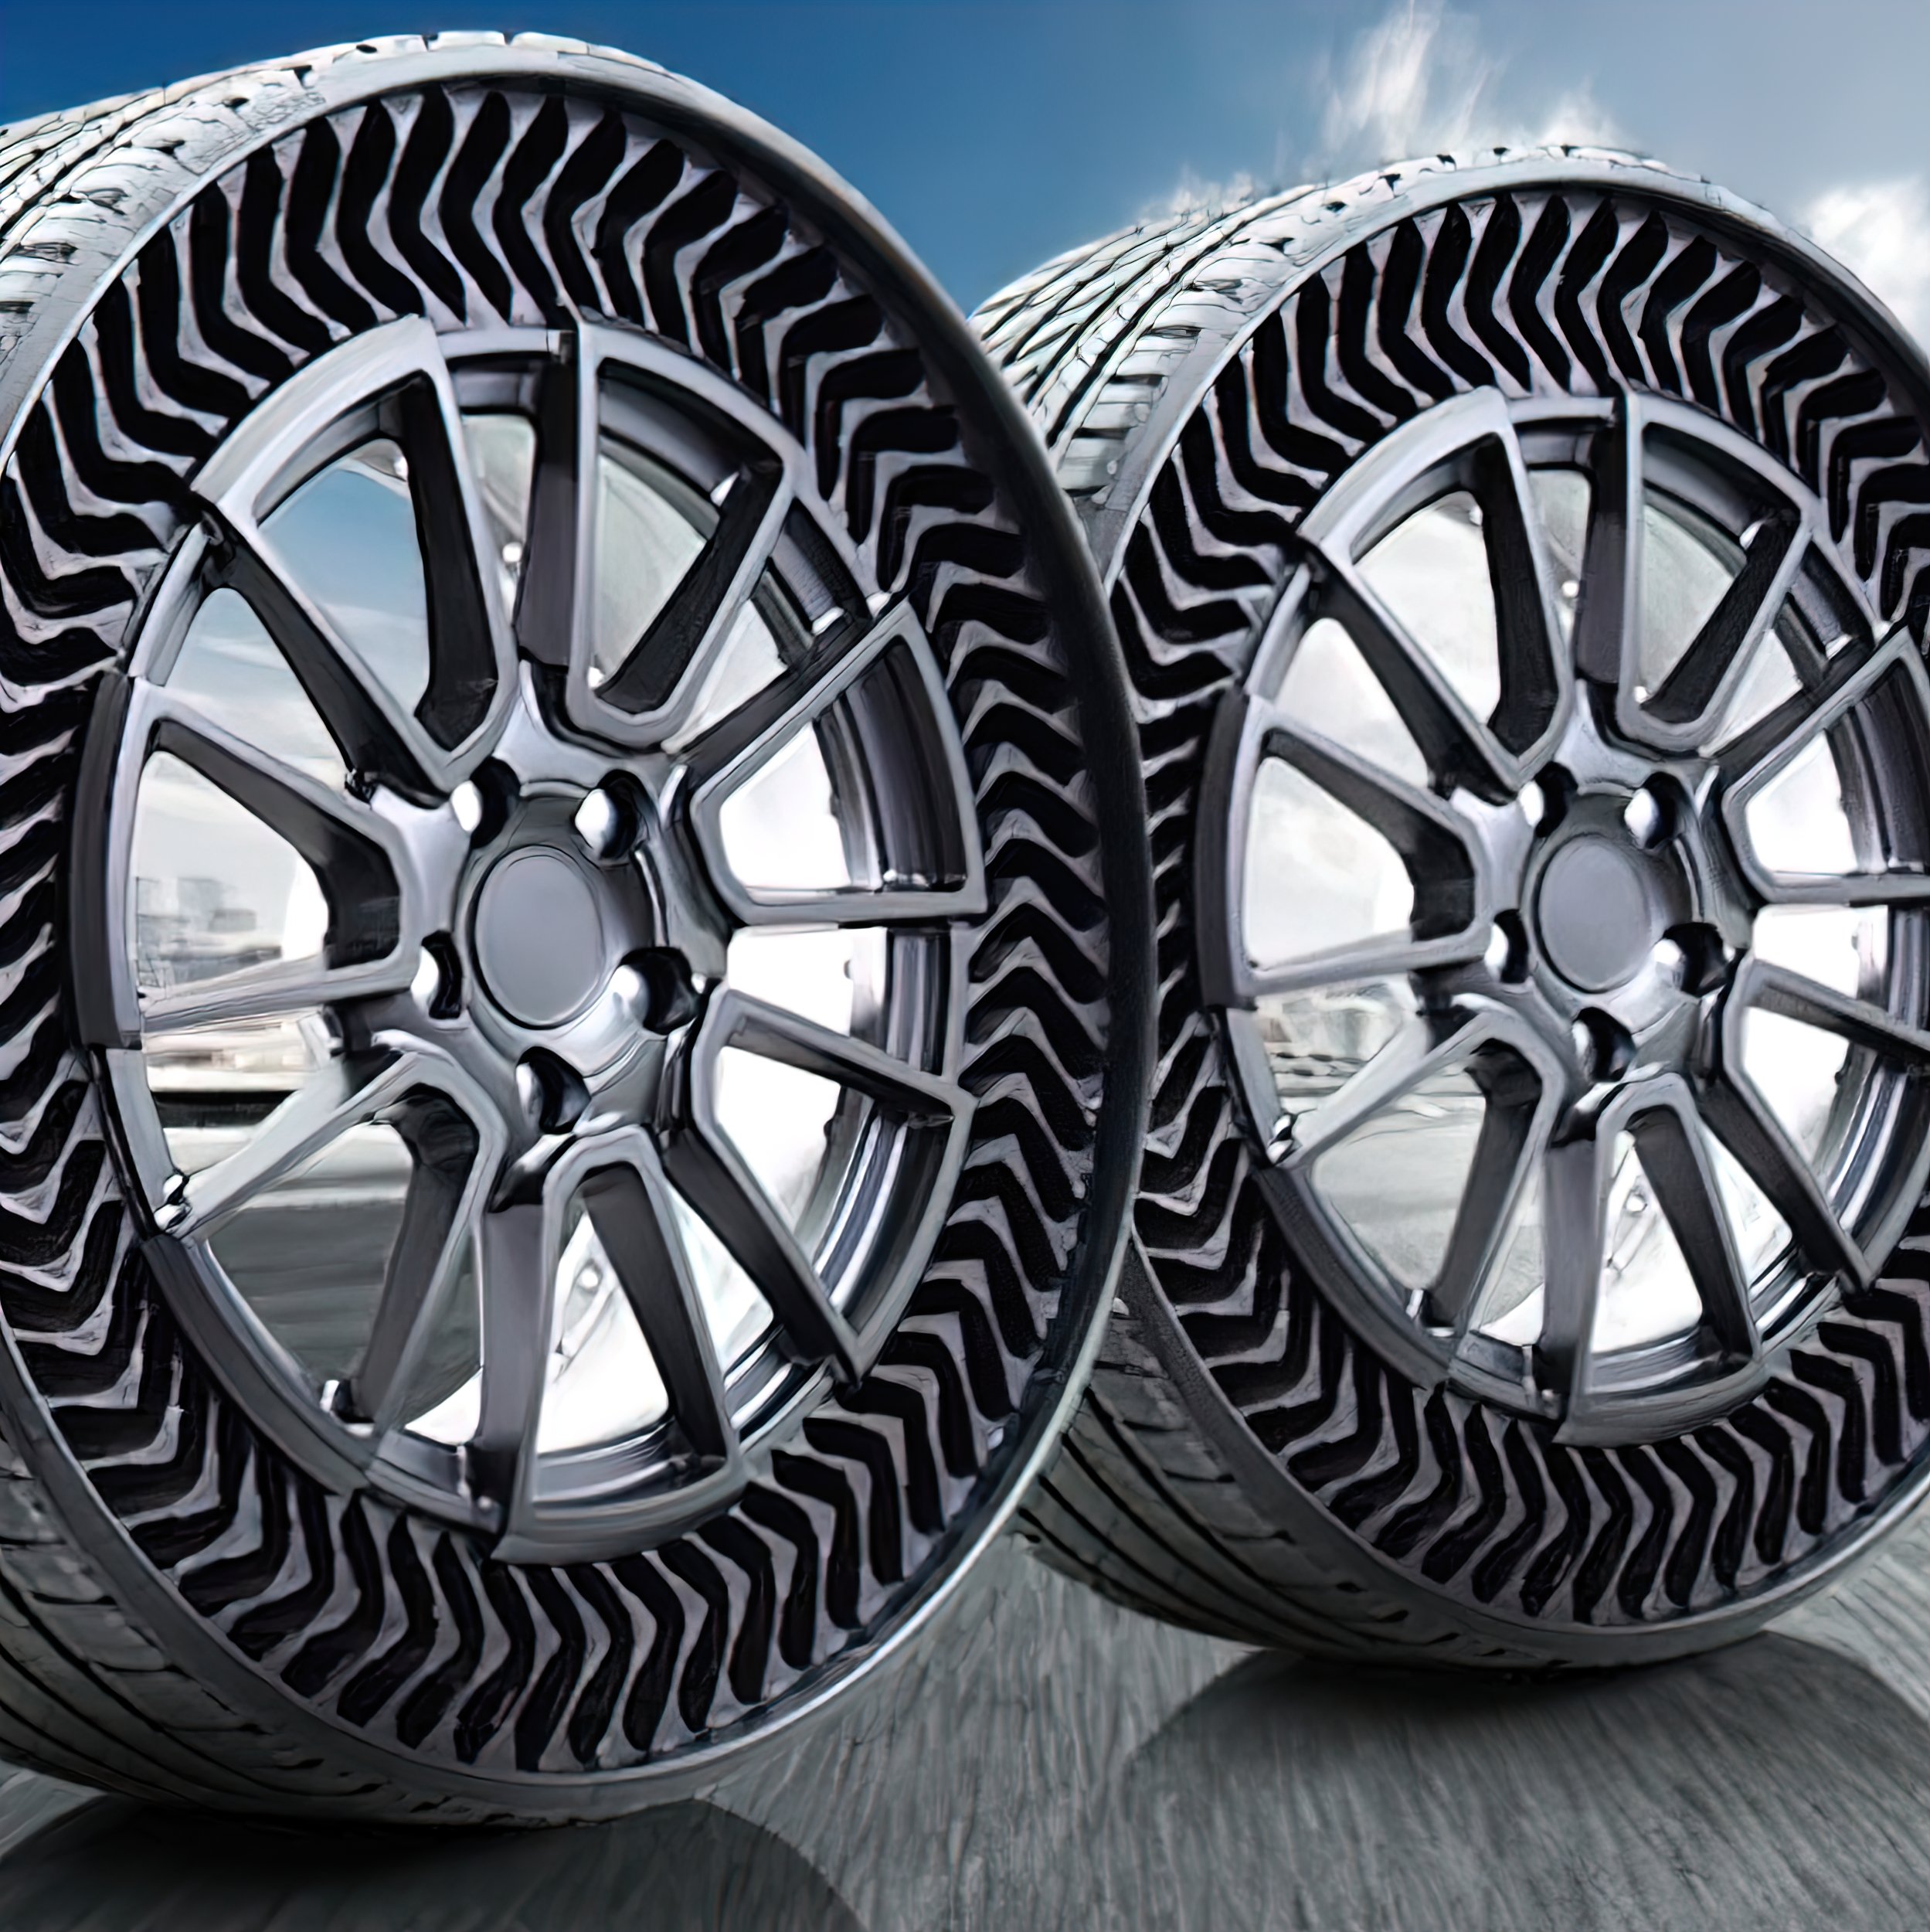 1ig Michelin Uptis Airless Tires 16fin-gigapixel-art-height-2500px-cropped.jpg